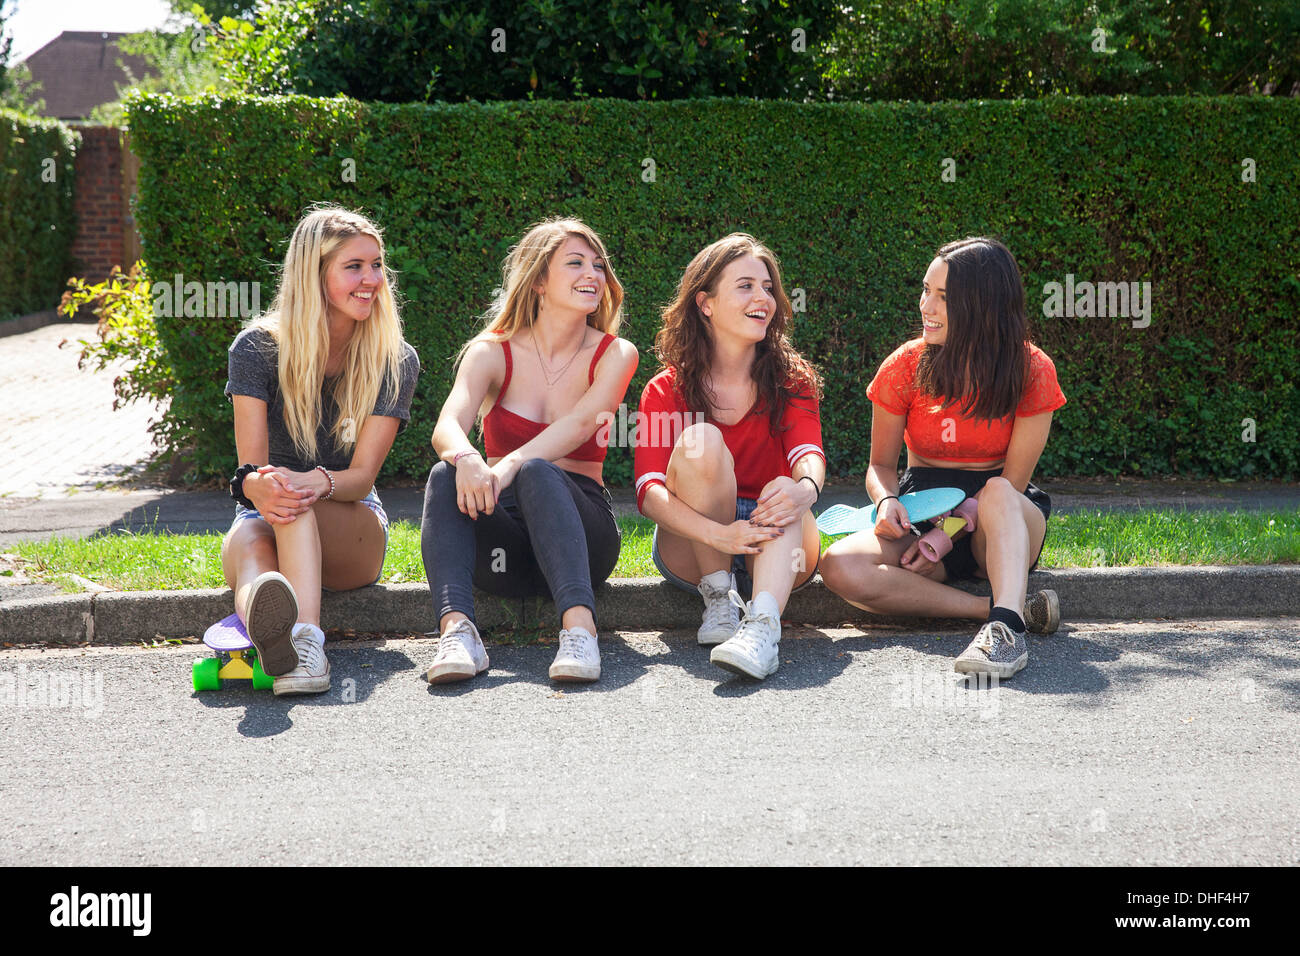 Four young women sitting on kerb with skateboards Stock Photo